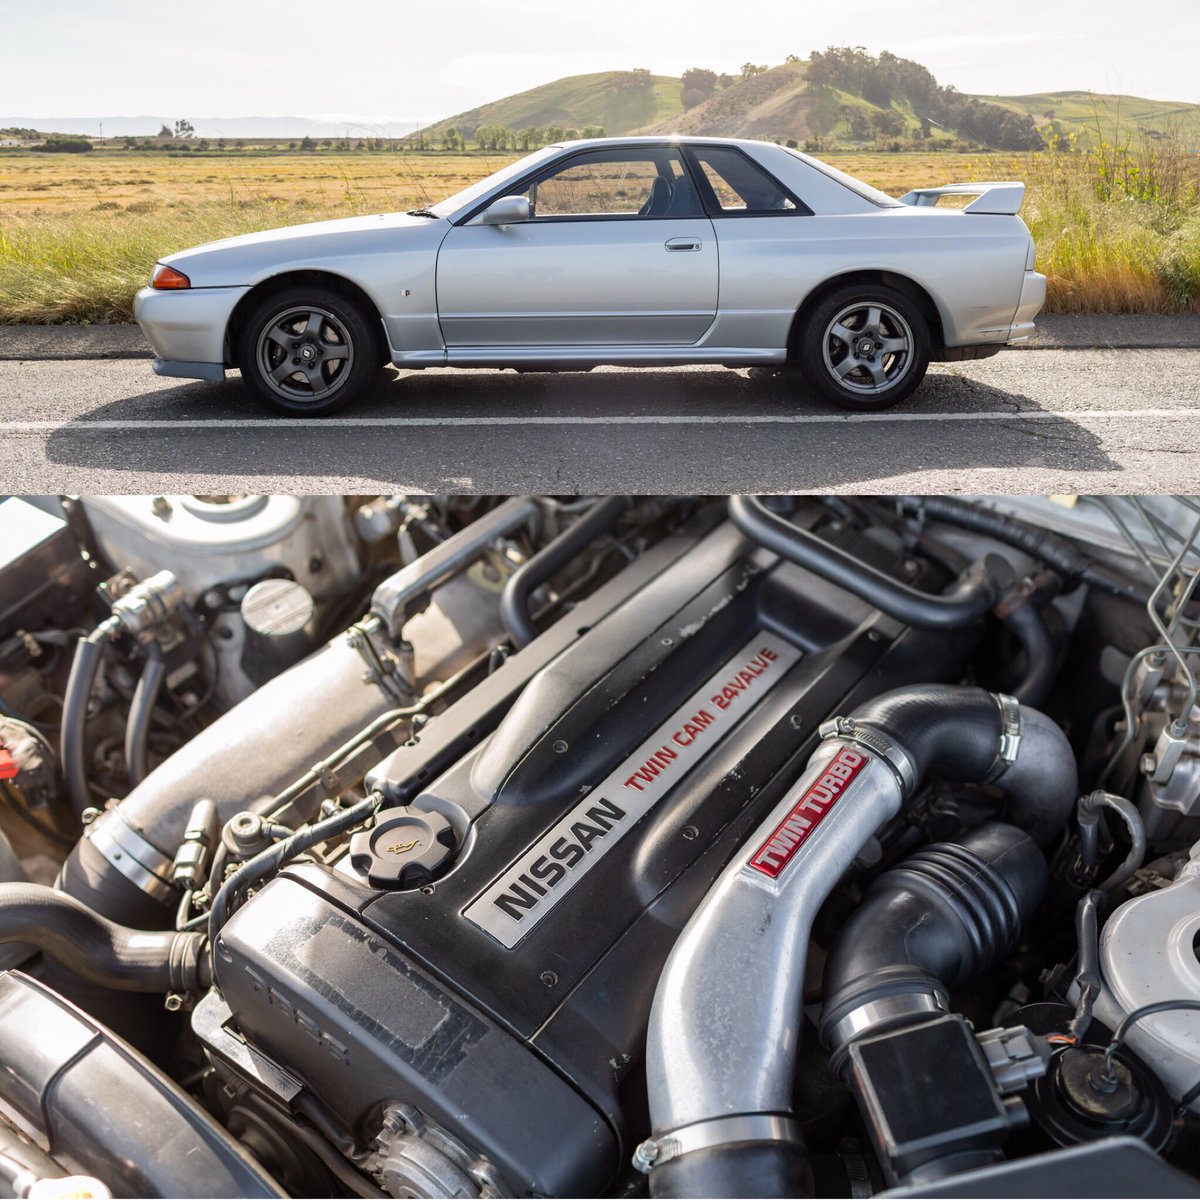 Z Car Garage For Sale This 1990 Nissan Skyline Gt R Has 86k Miles And Holds Full California Emissions Compliance With Up To Date Maintenance A Clear Title And Current Registration This